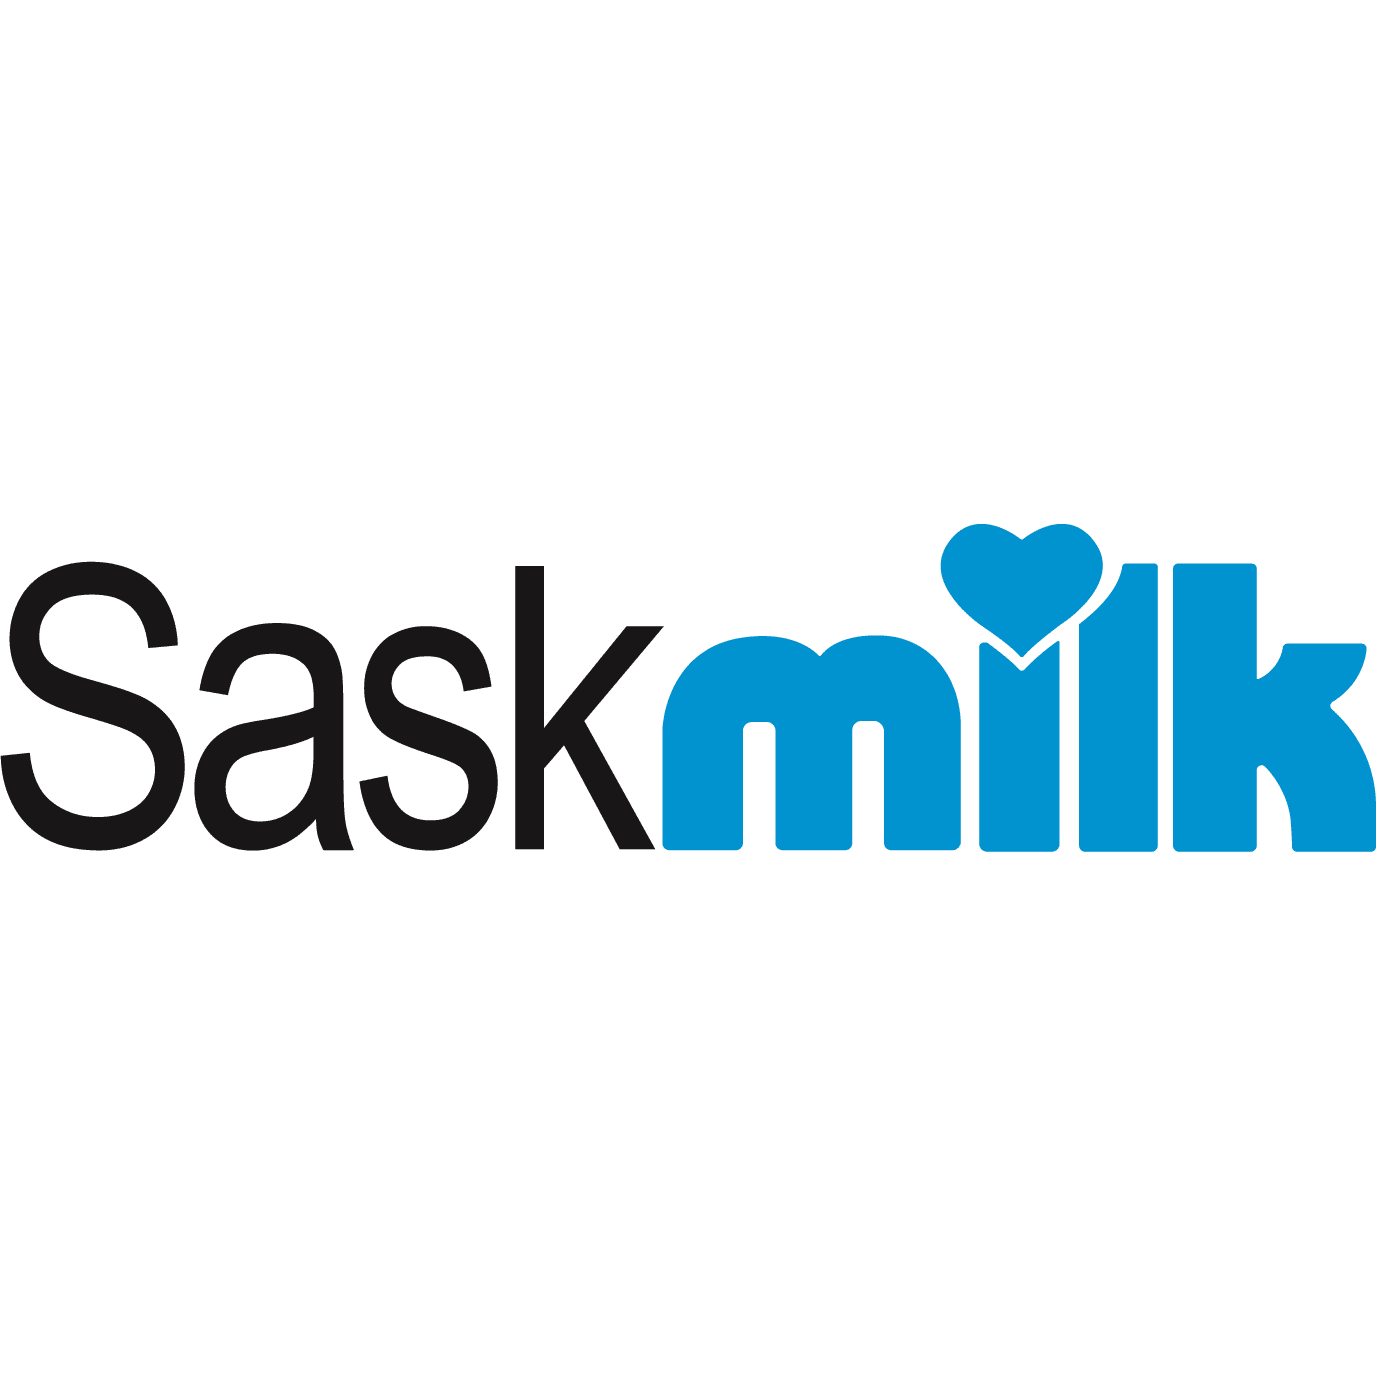 Direct West dials into the power of Hivestack’s geotemporal Ad Server technology to drive brand awareness and purchase intent for SaskMilk Armstrong Cheese.